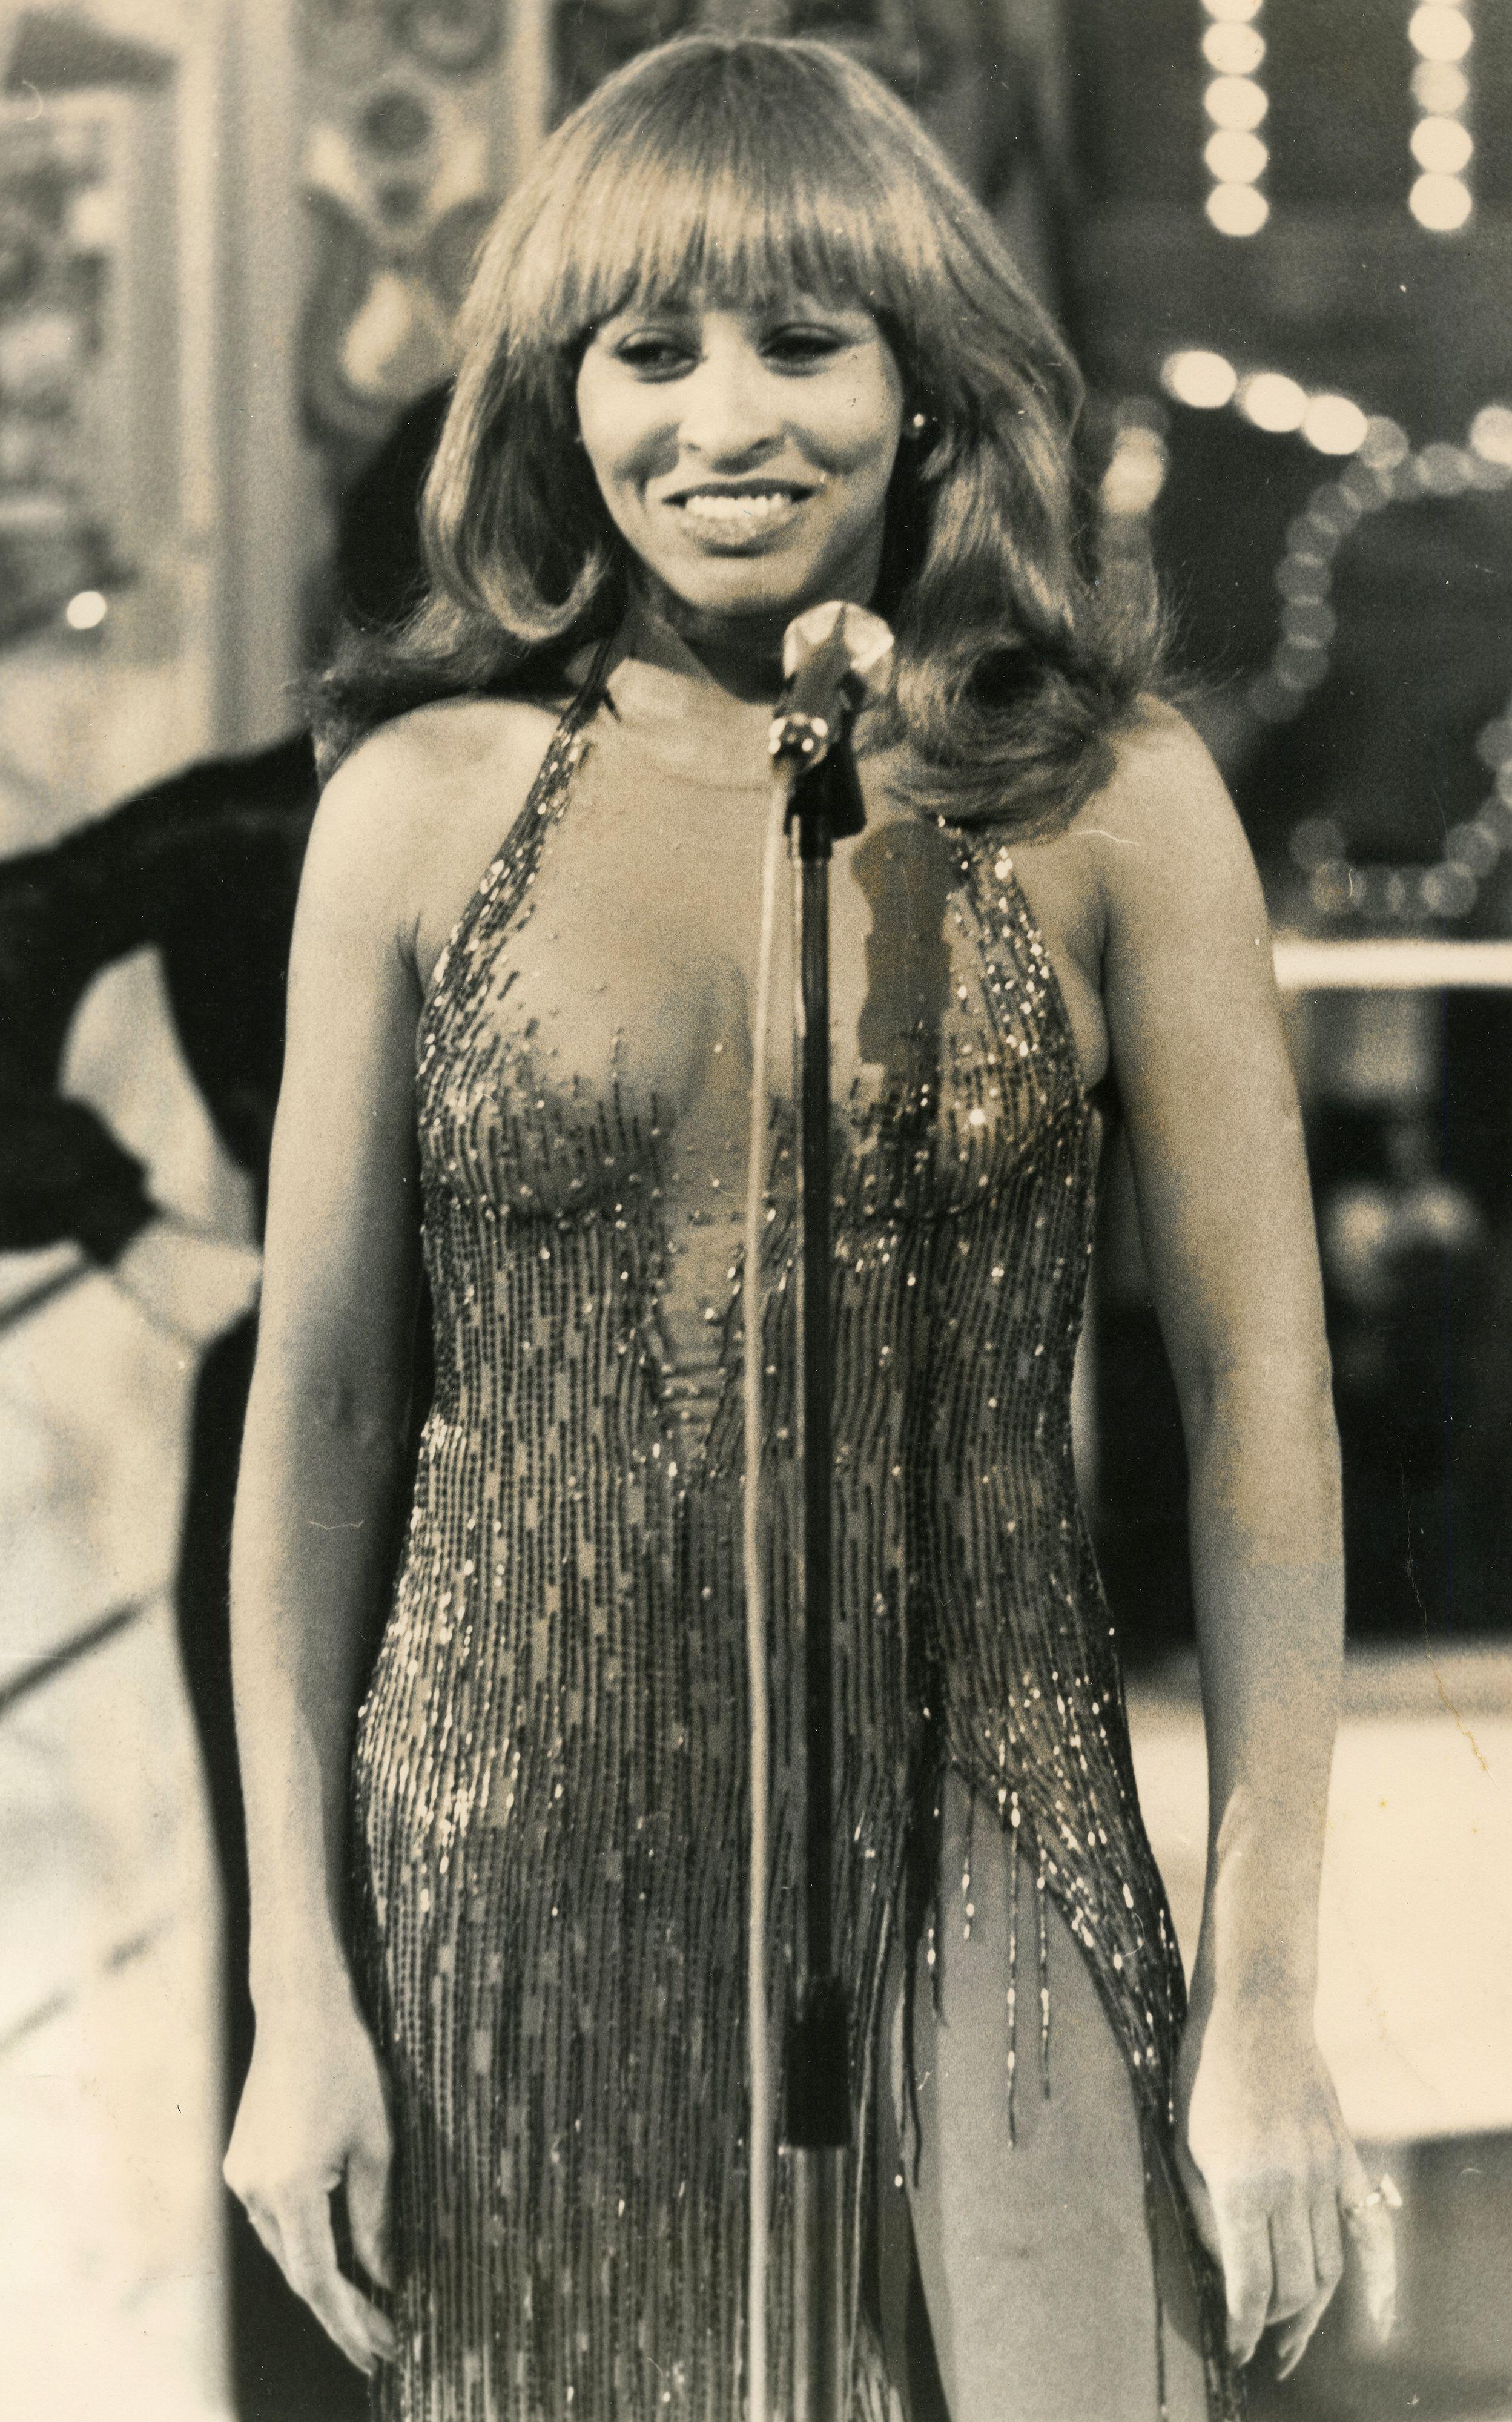 Tina Turner early in her career